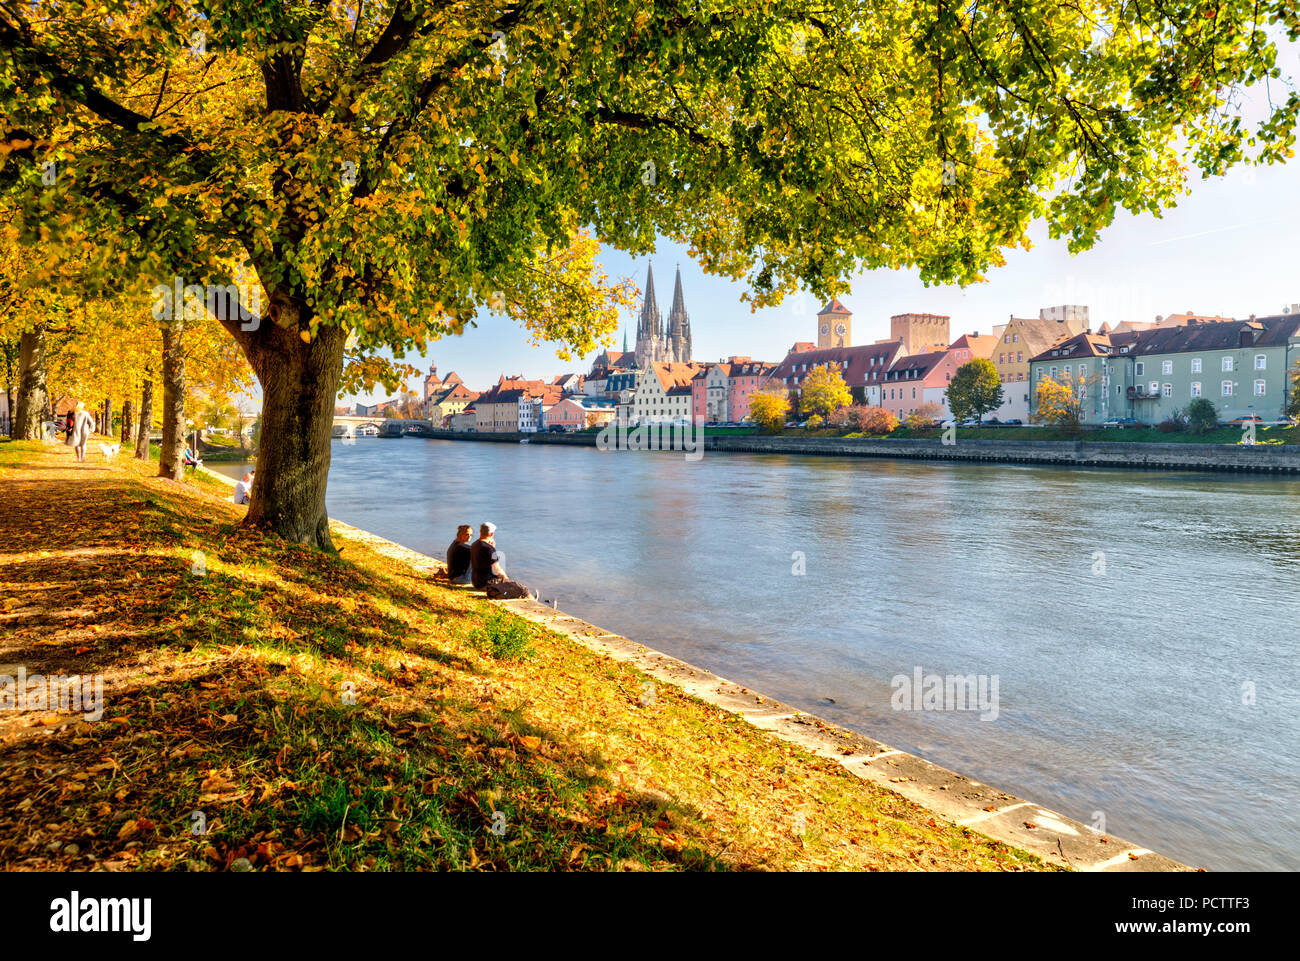 View from the Jahn Island, cathedral, waterfront, autumn, Regensburg, Upper Palatinate, Bavaria, Germany, Europe, Stock Photo